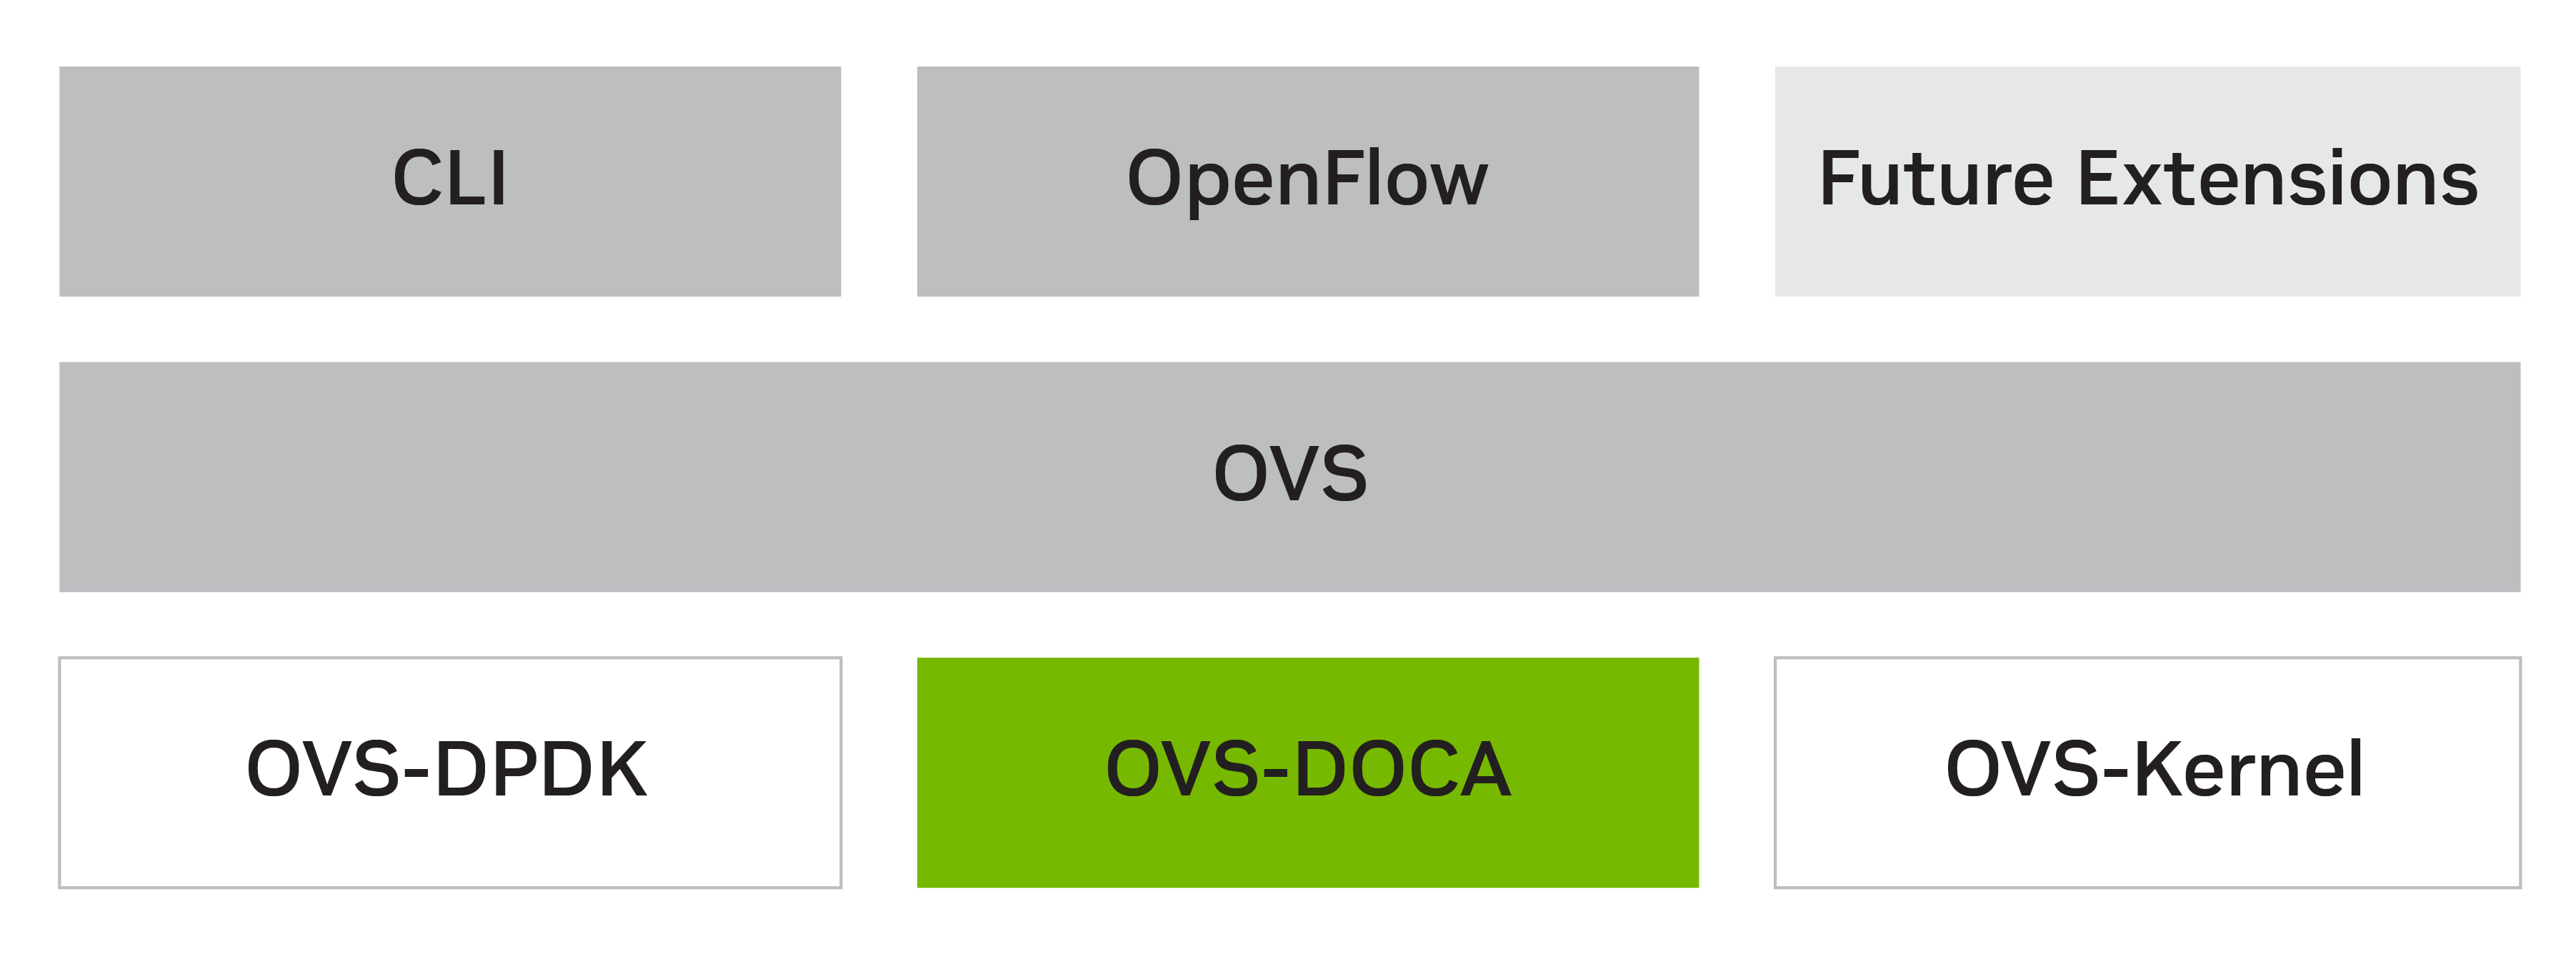 A block diagram highlighting OVS-DOCA and its position relative to OVS-DPDK, OVS-Kernel, OVS, CLI, and OpenFlow
